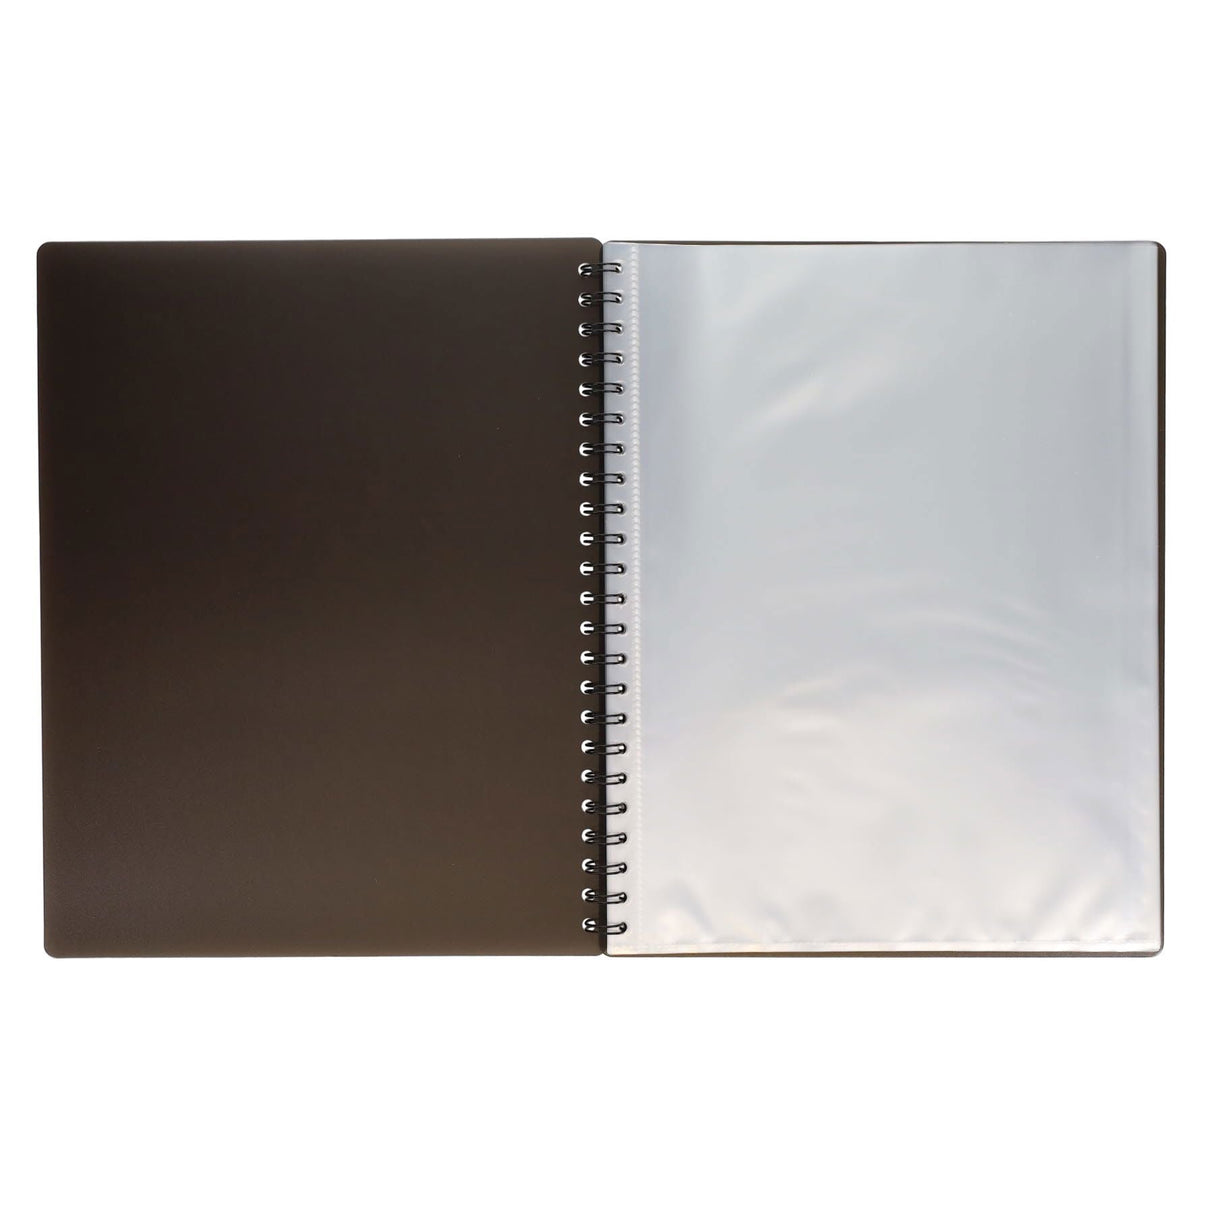 Concept A4 50 Pocket Wiro Display Book - Black | Stationery Shop UK